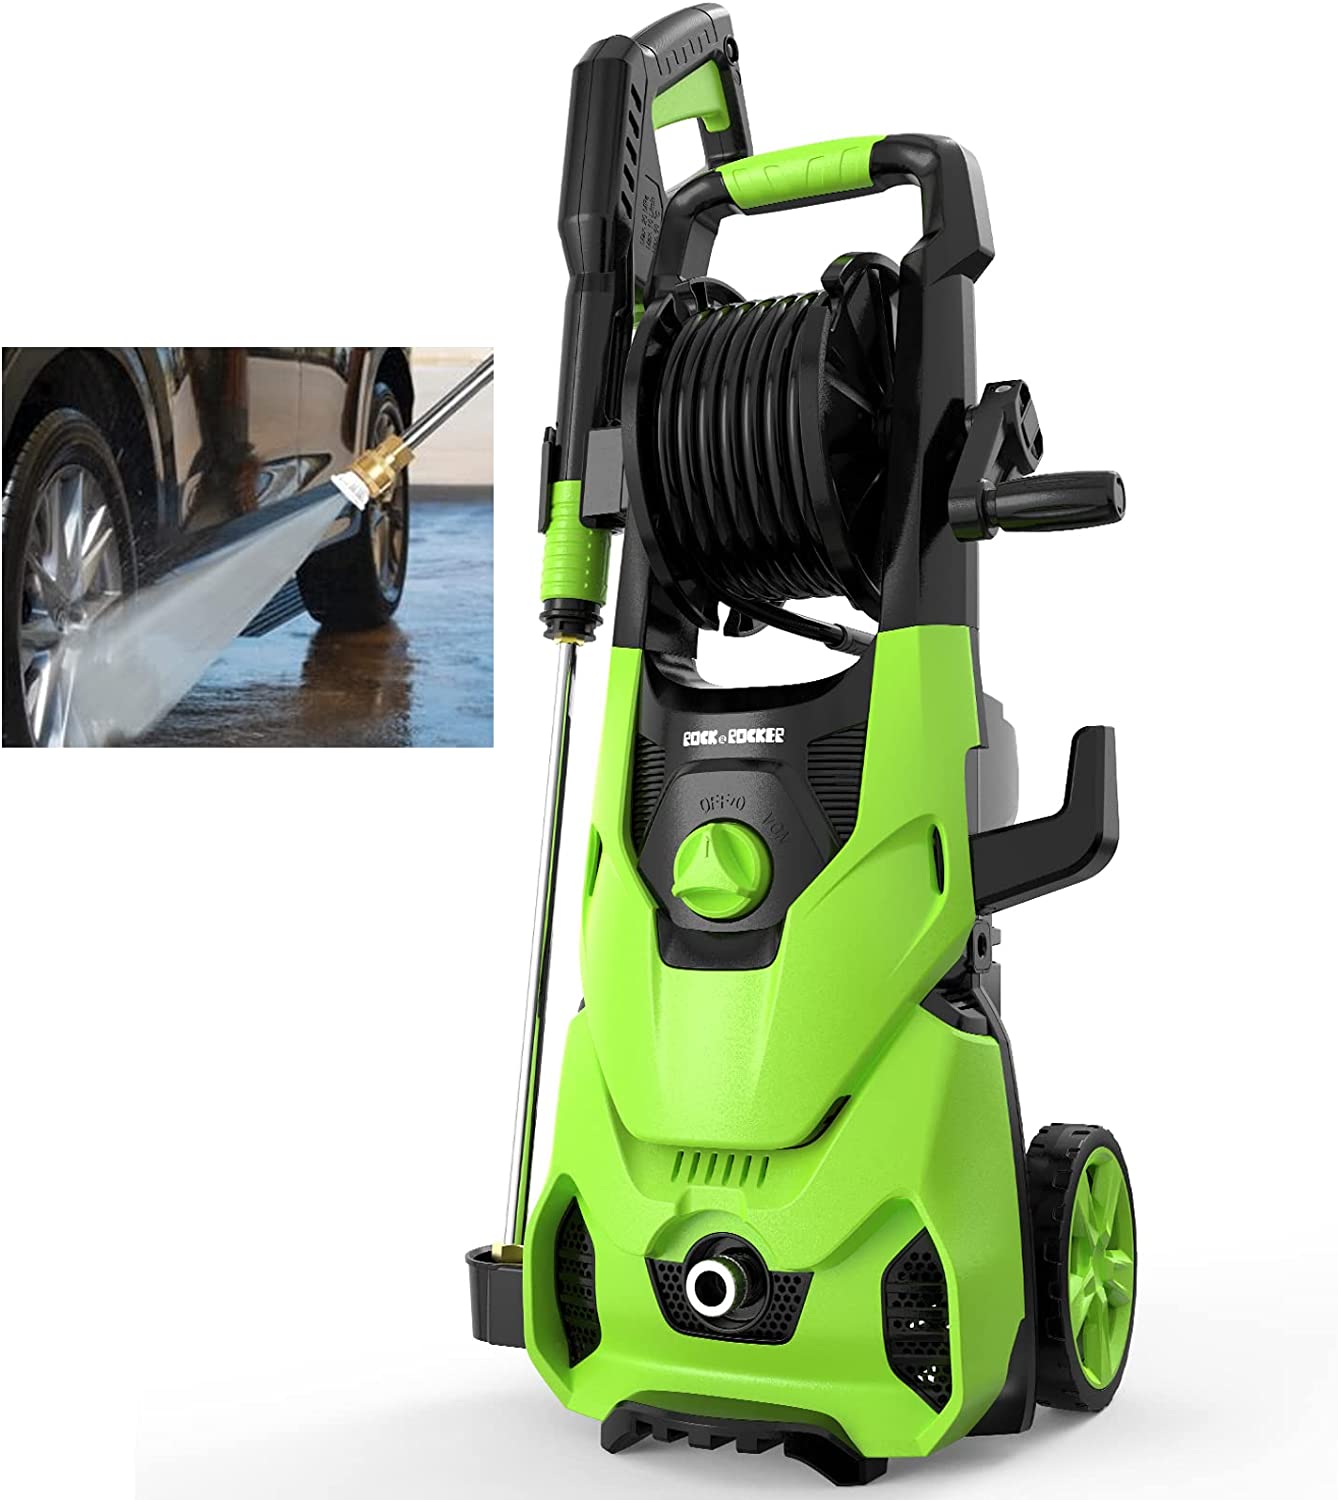 Rock&Rocker Electric Pressure Washer, 2150 Max PSI 2.6 GPM Washer with 4 Nozzles Foam Cannon for Cars